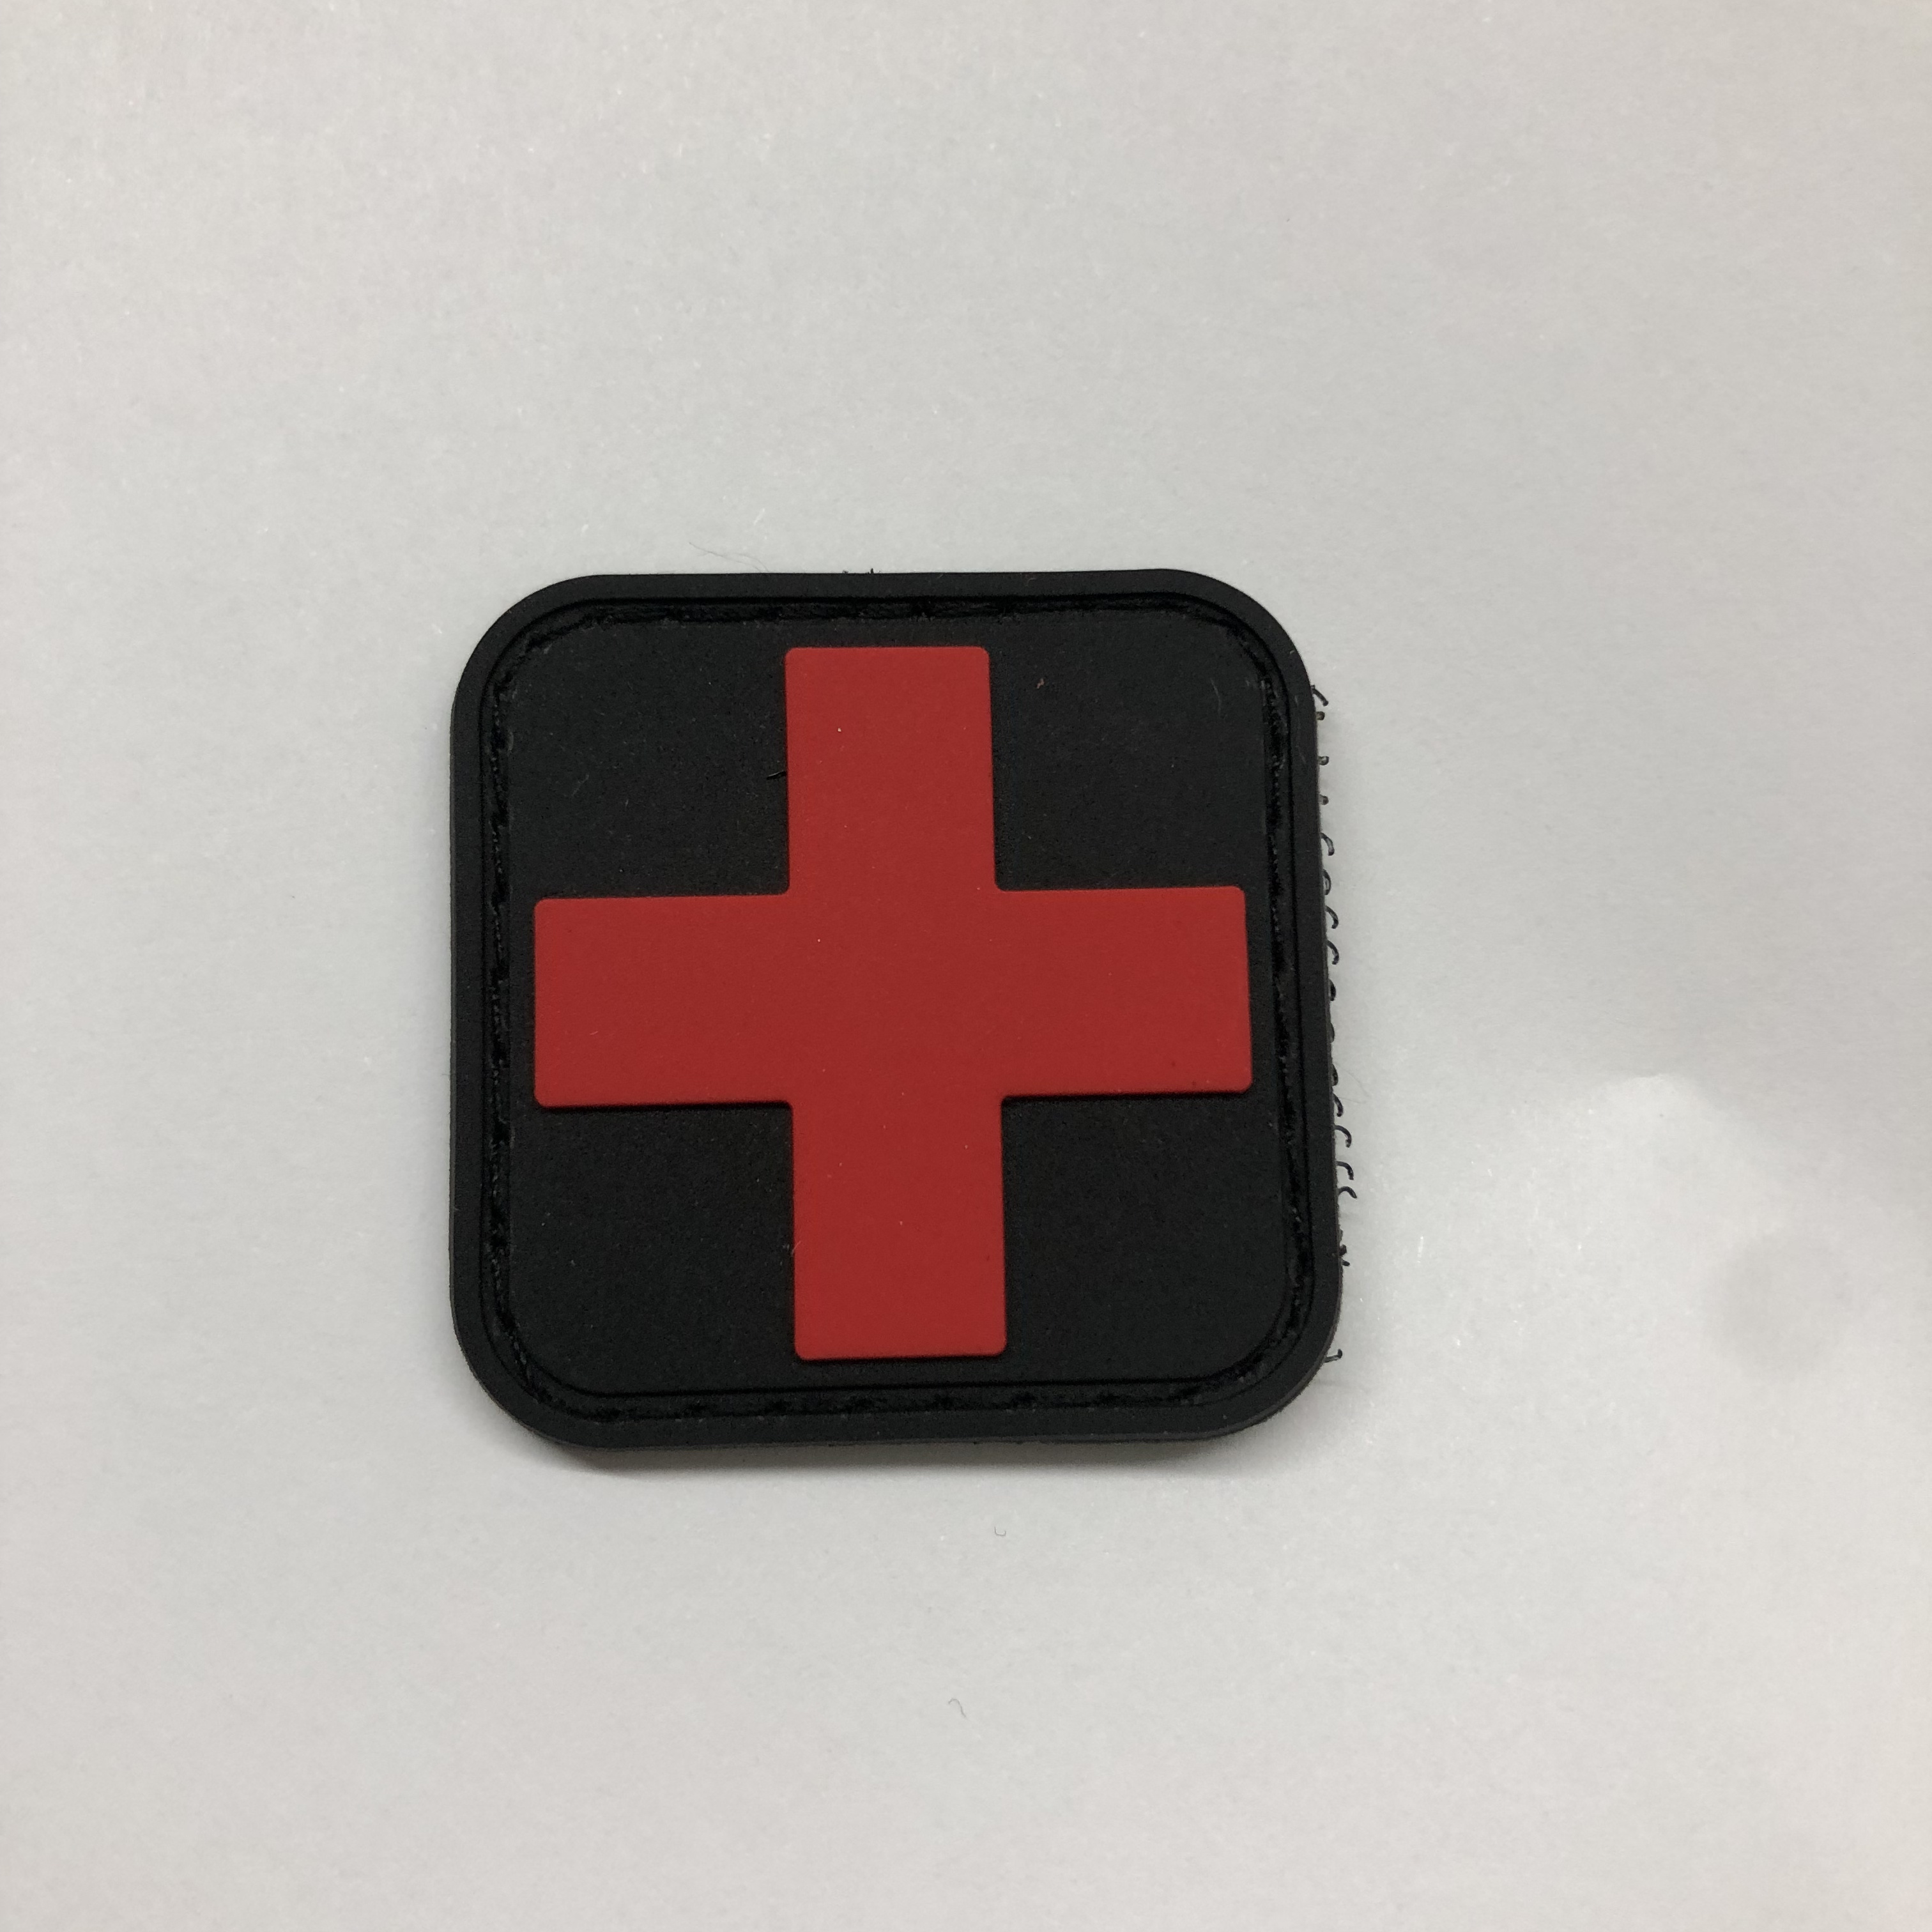 2 PCS Tactical Medic Patches Morale IR Infrared Med Patch for IFAK,EMT,  EMS, Military,Trauma, Medical, Emergency Pouch